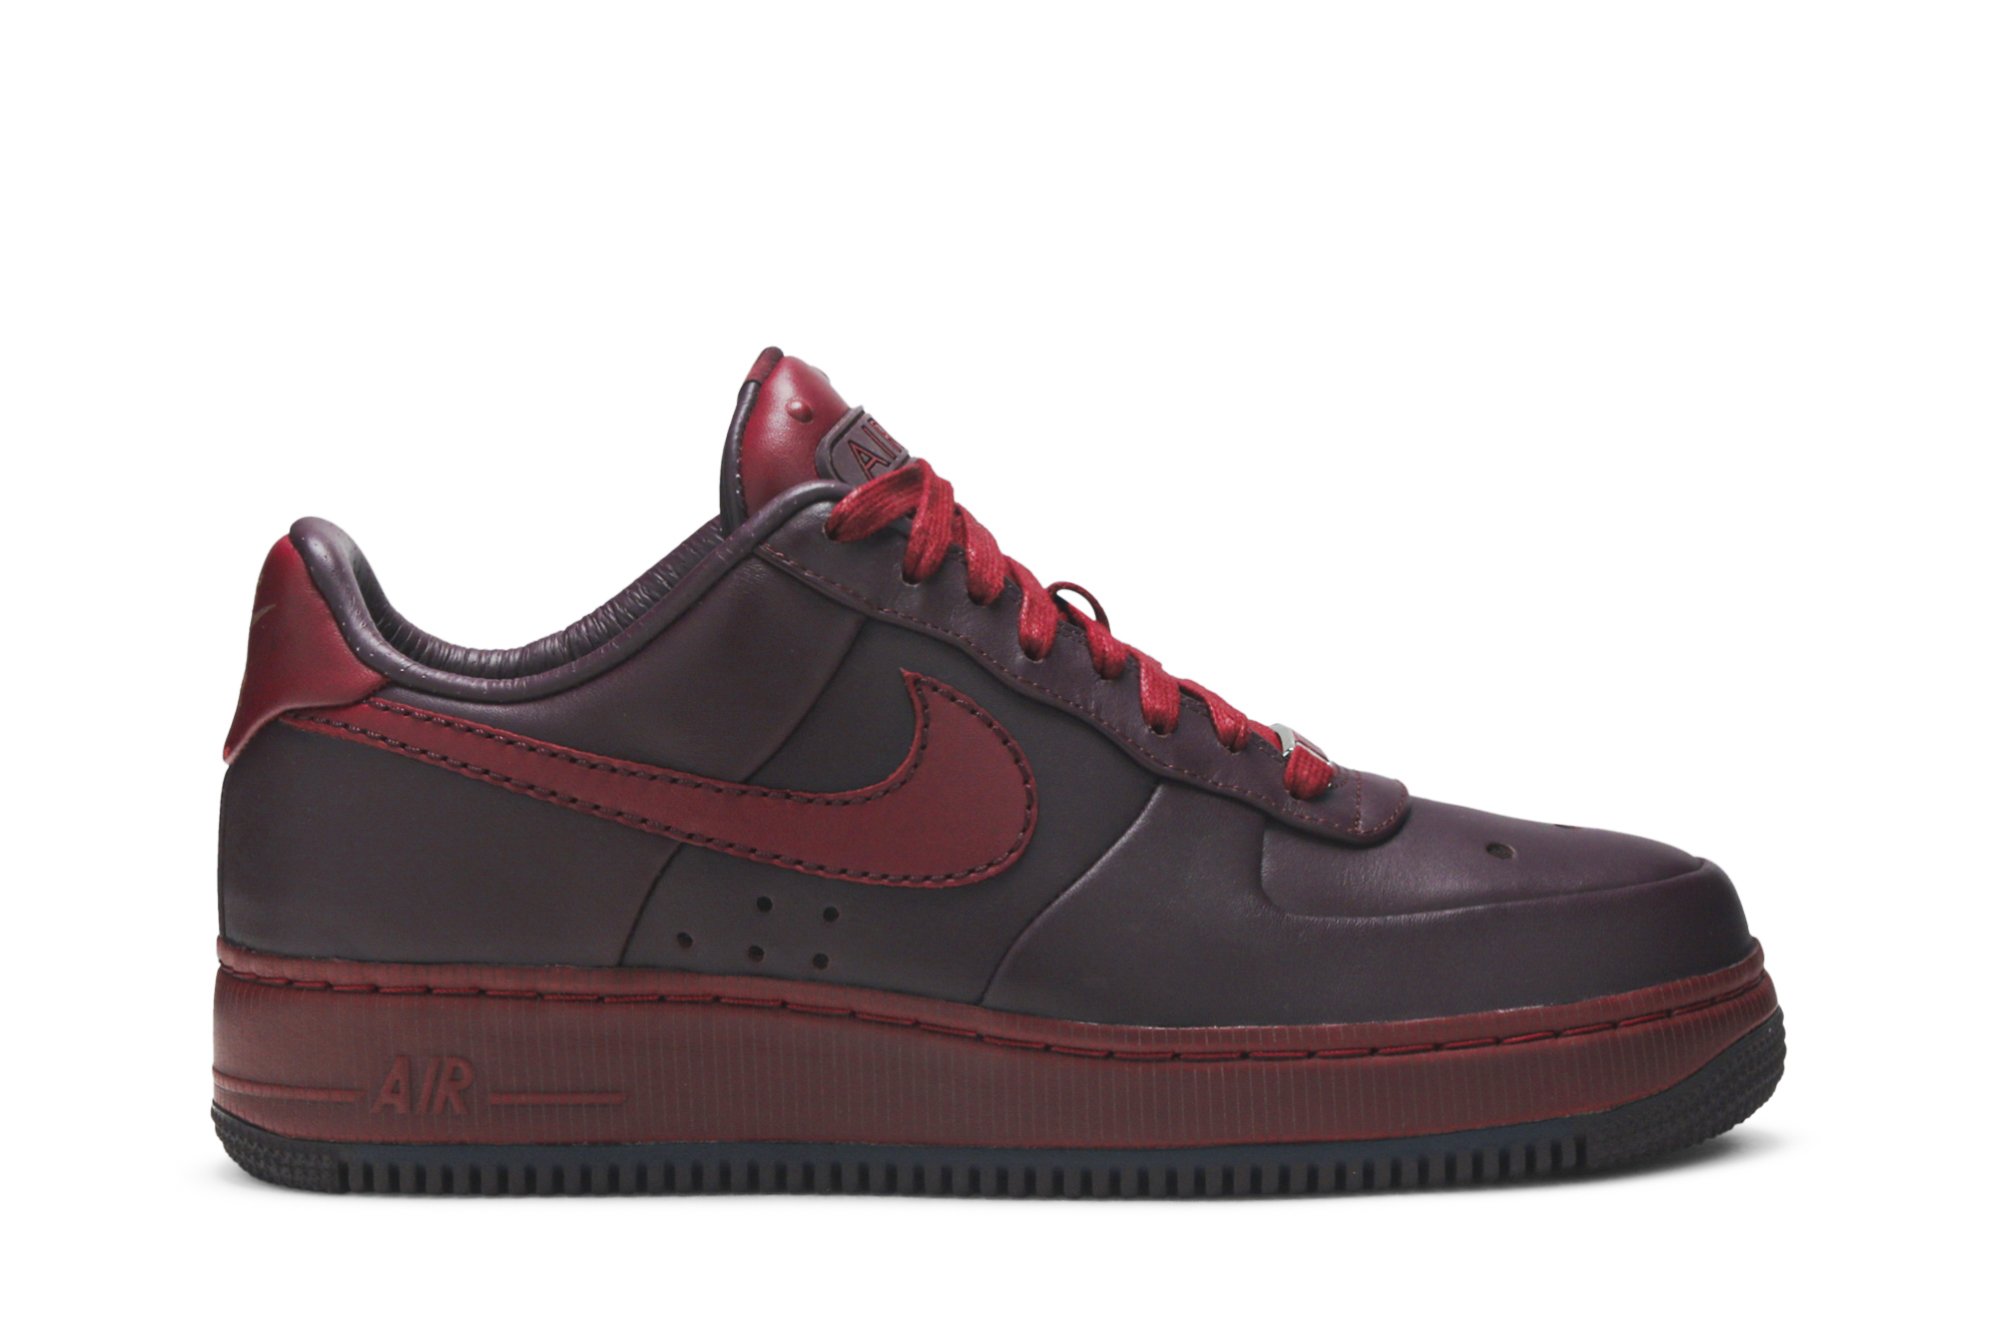 Buy Air Force 1 Low Supreme Mco Cb 'Charles Barkley' - 317333 661 | GOAT